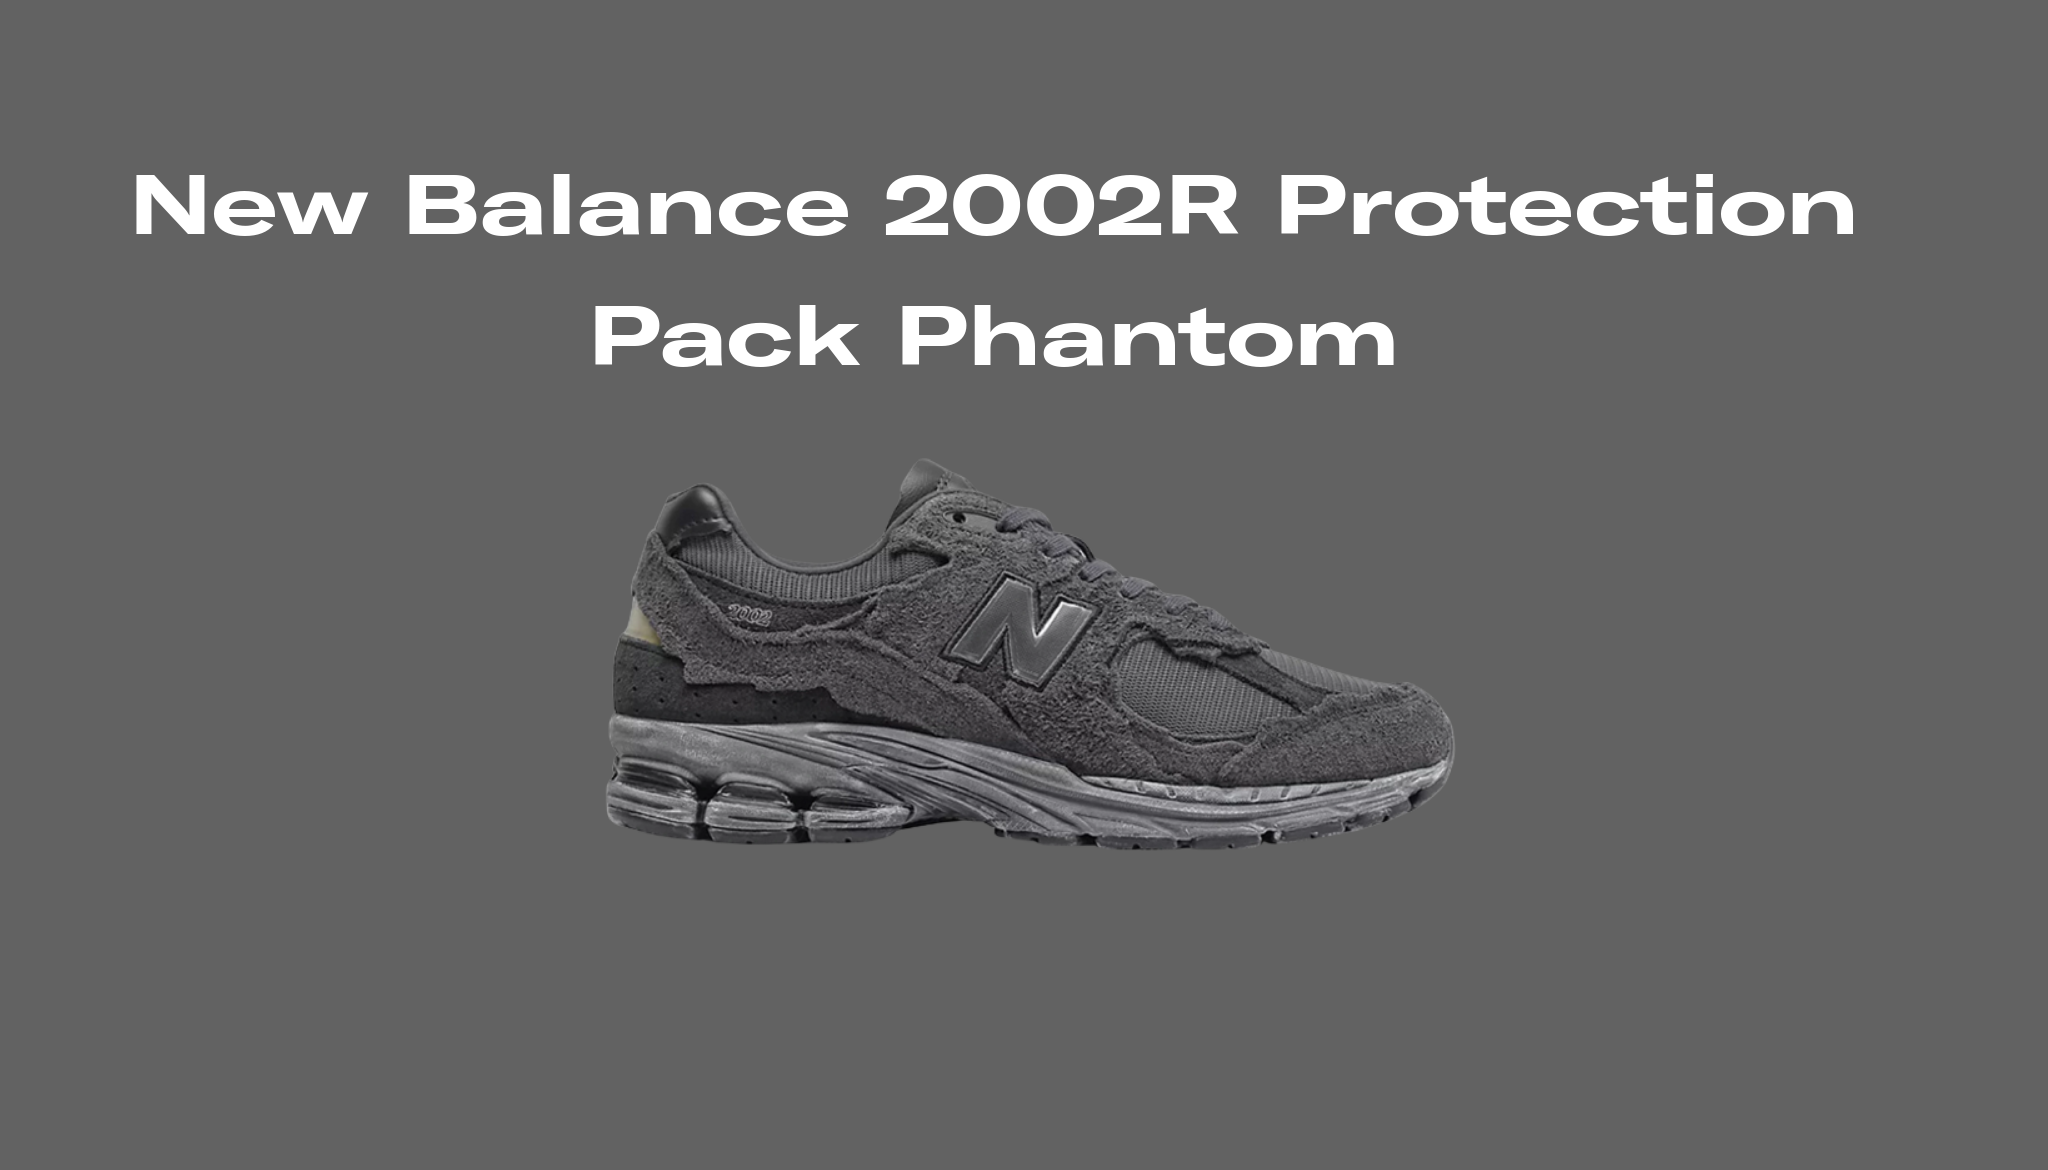 New Balance 2002R Protection Pack Phantom, Raffles and Release 